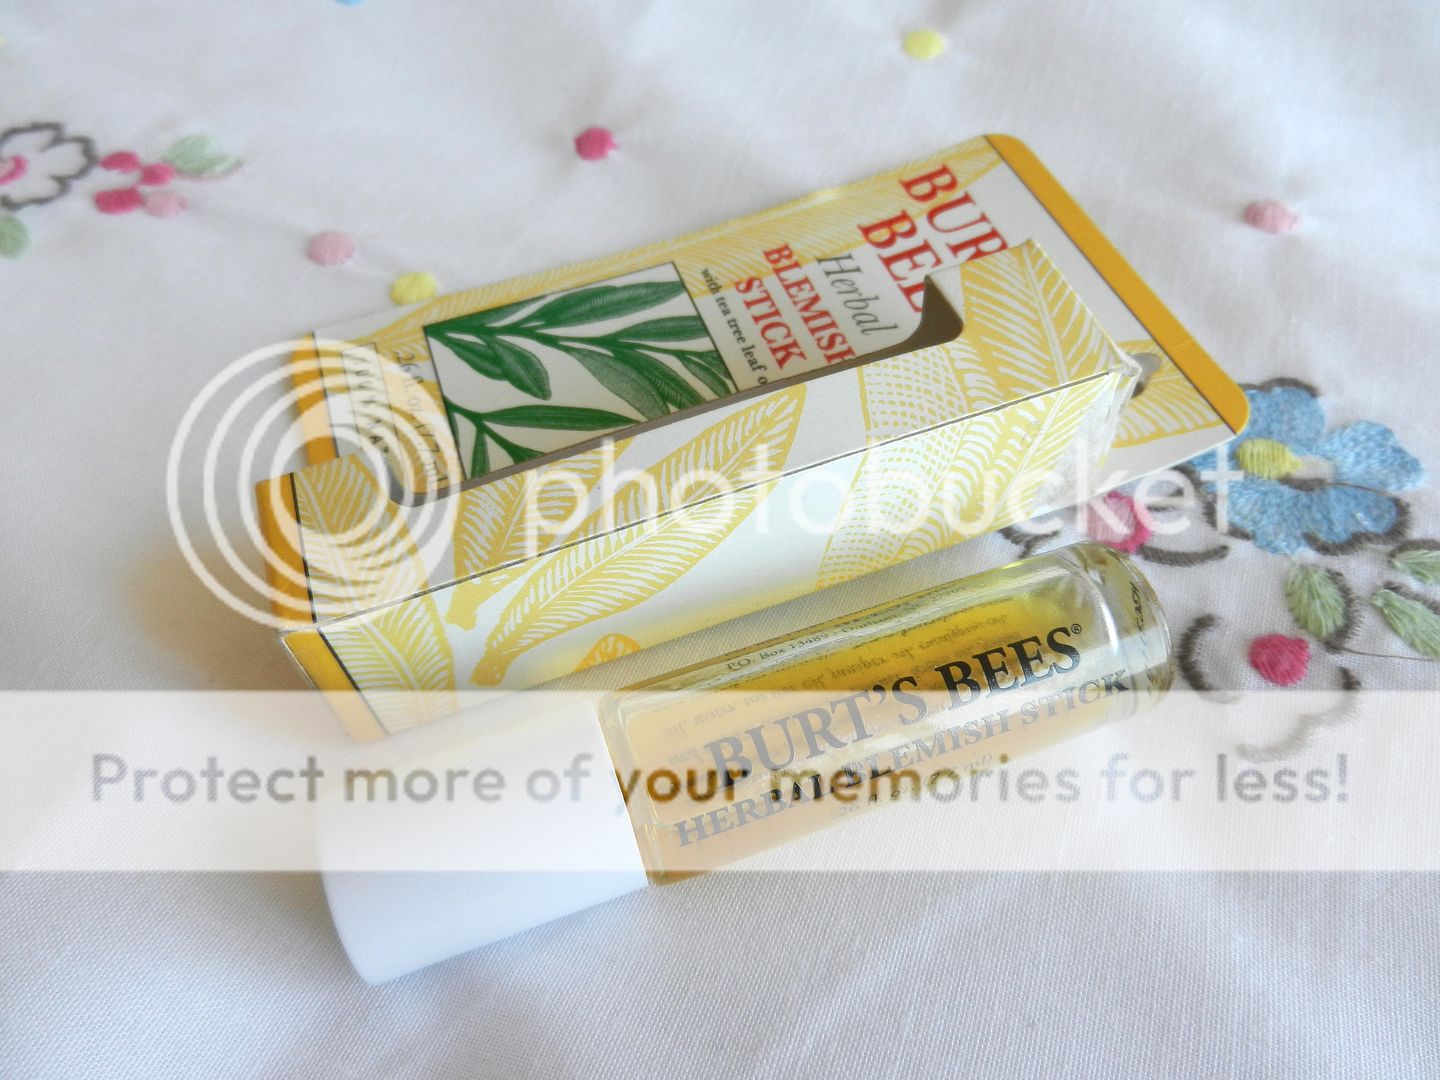 products to get rid of spots, burts bees herbal blemish stick